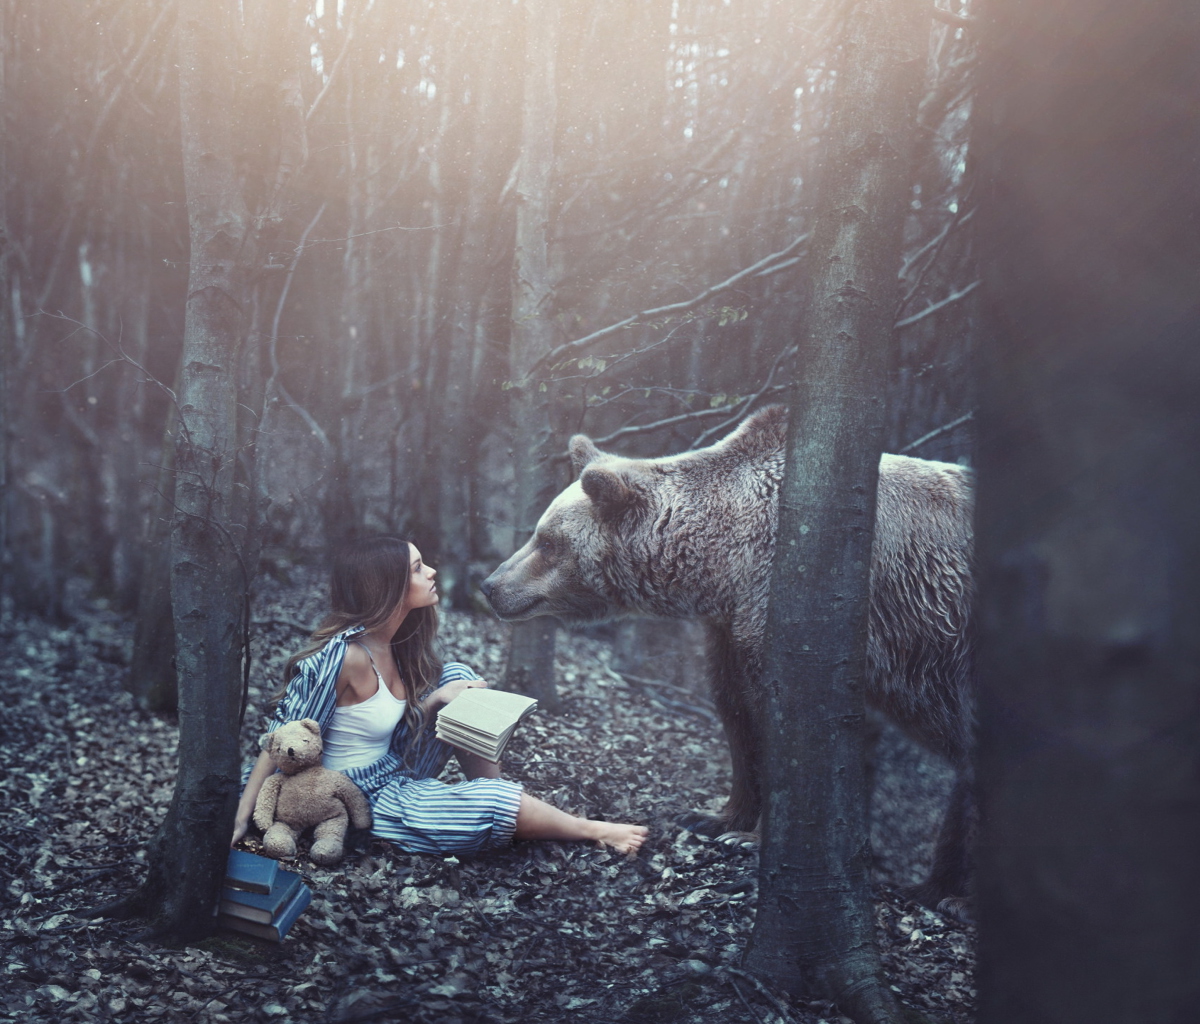 Girl And Two Bears In Forest By Rosie Hardy Photographer wallpaper 1200x1024